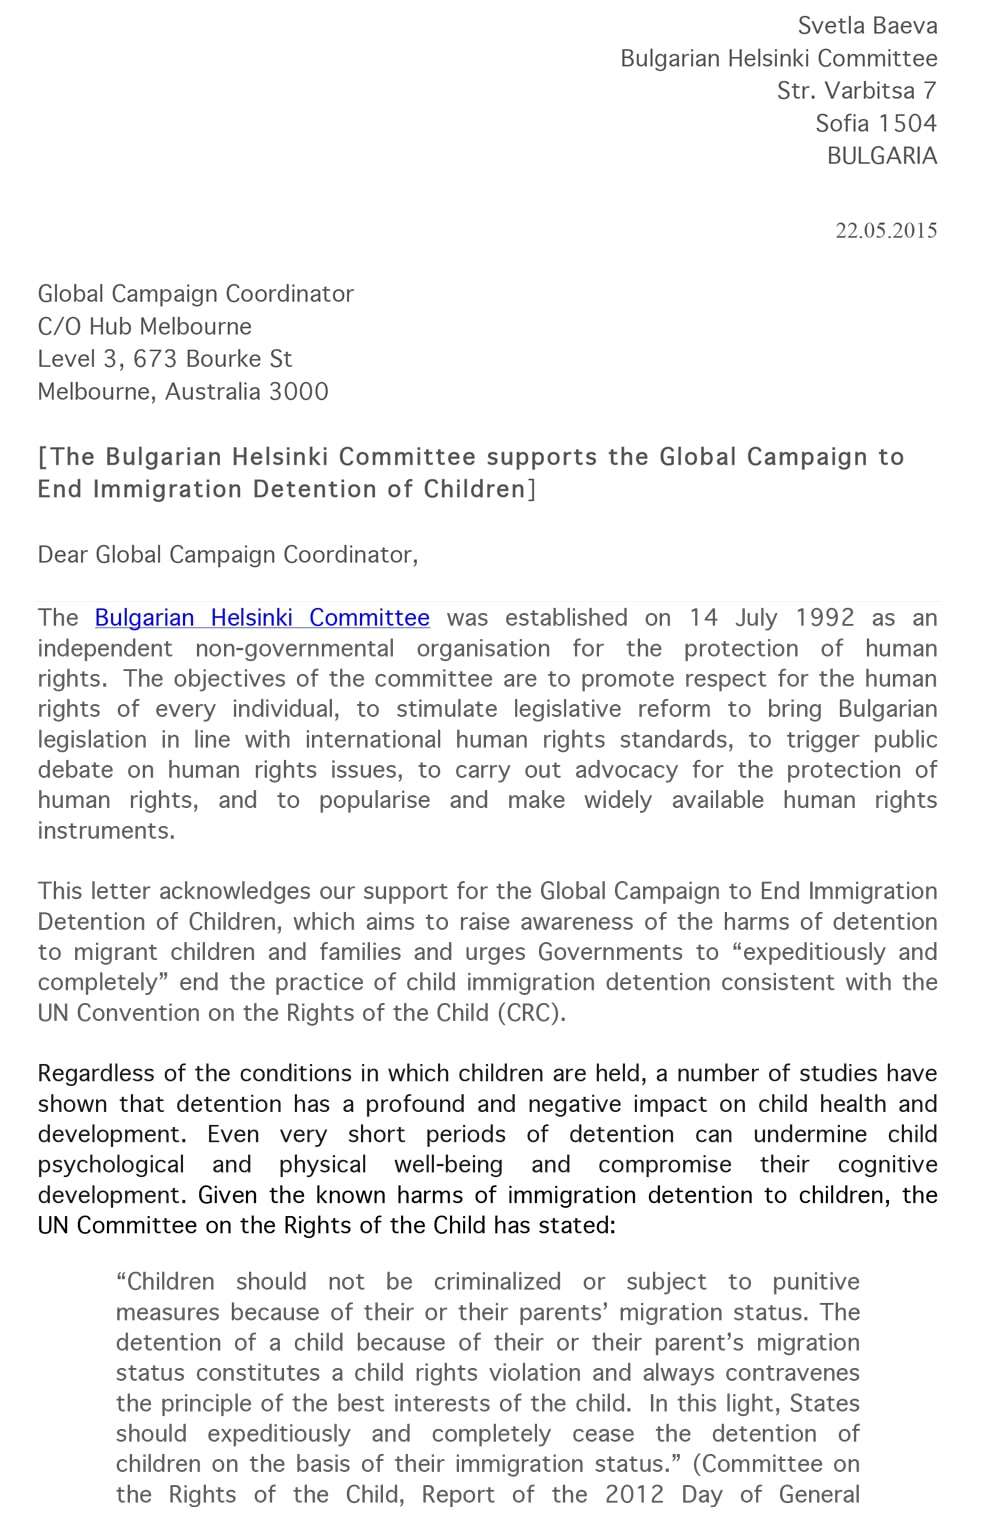 Letter-of-support-End-Child-Detention-Campaign-(1)-1